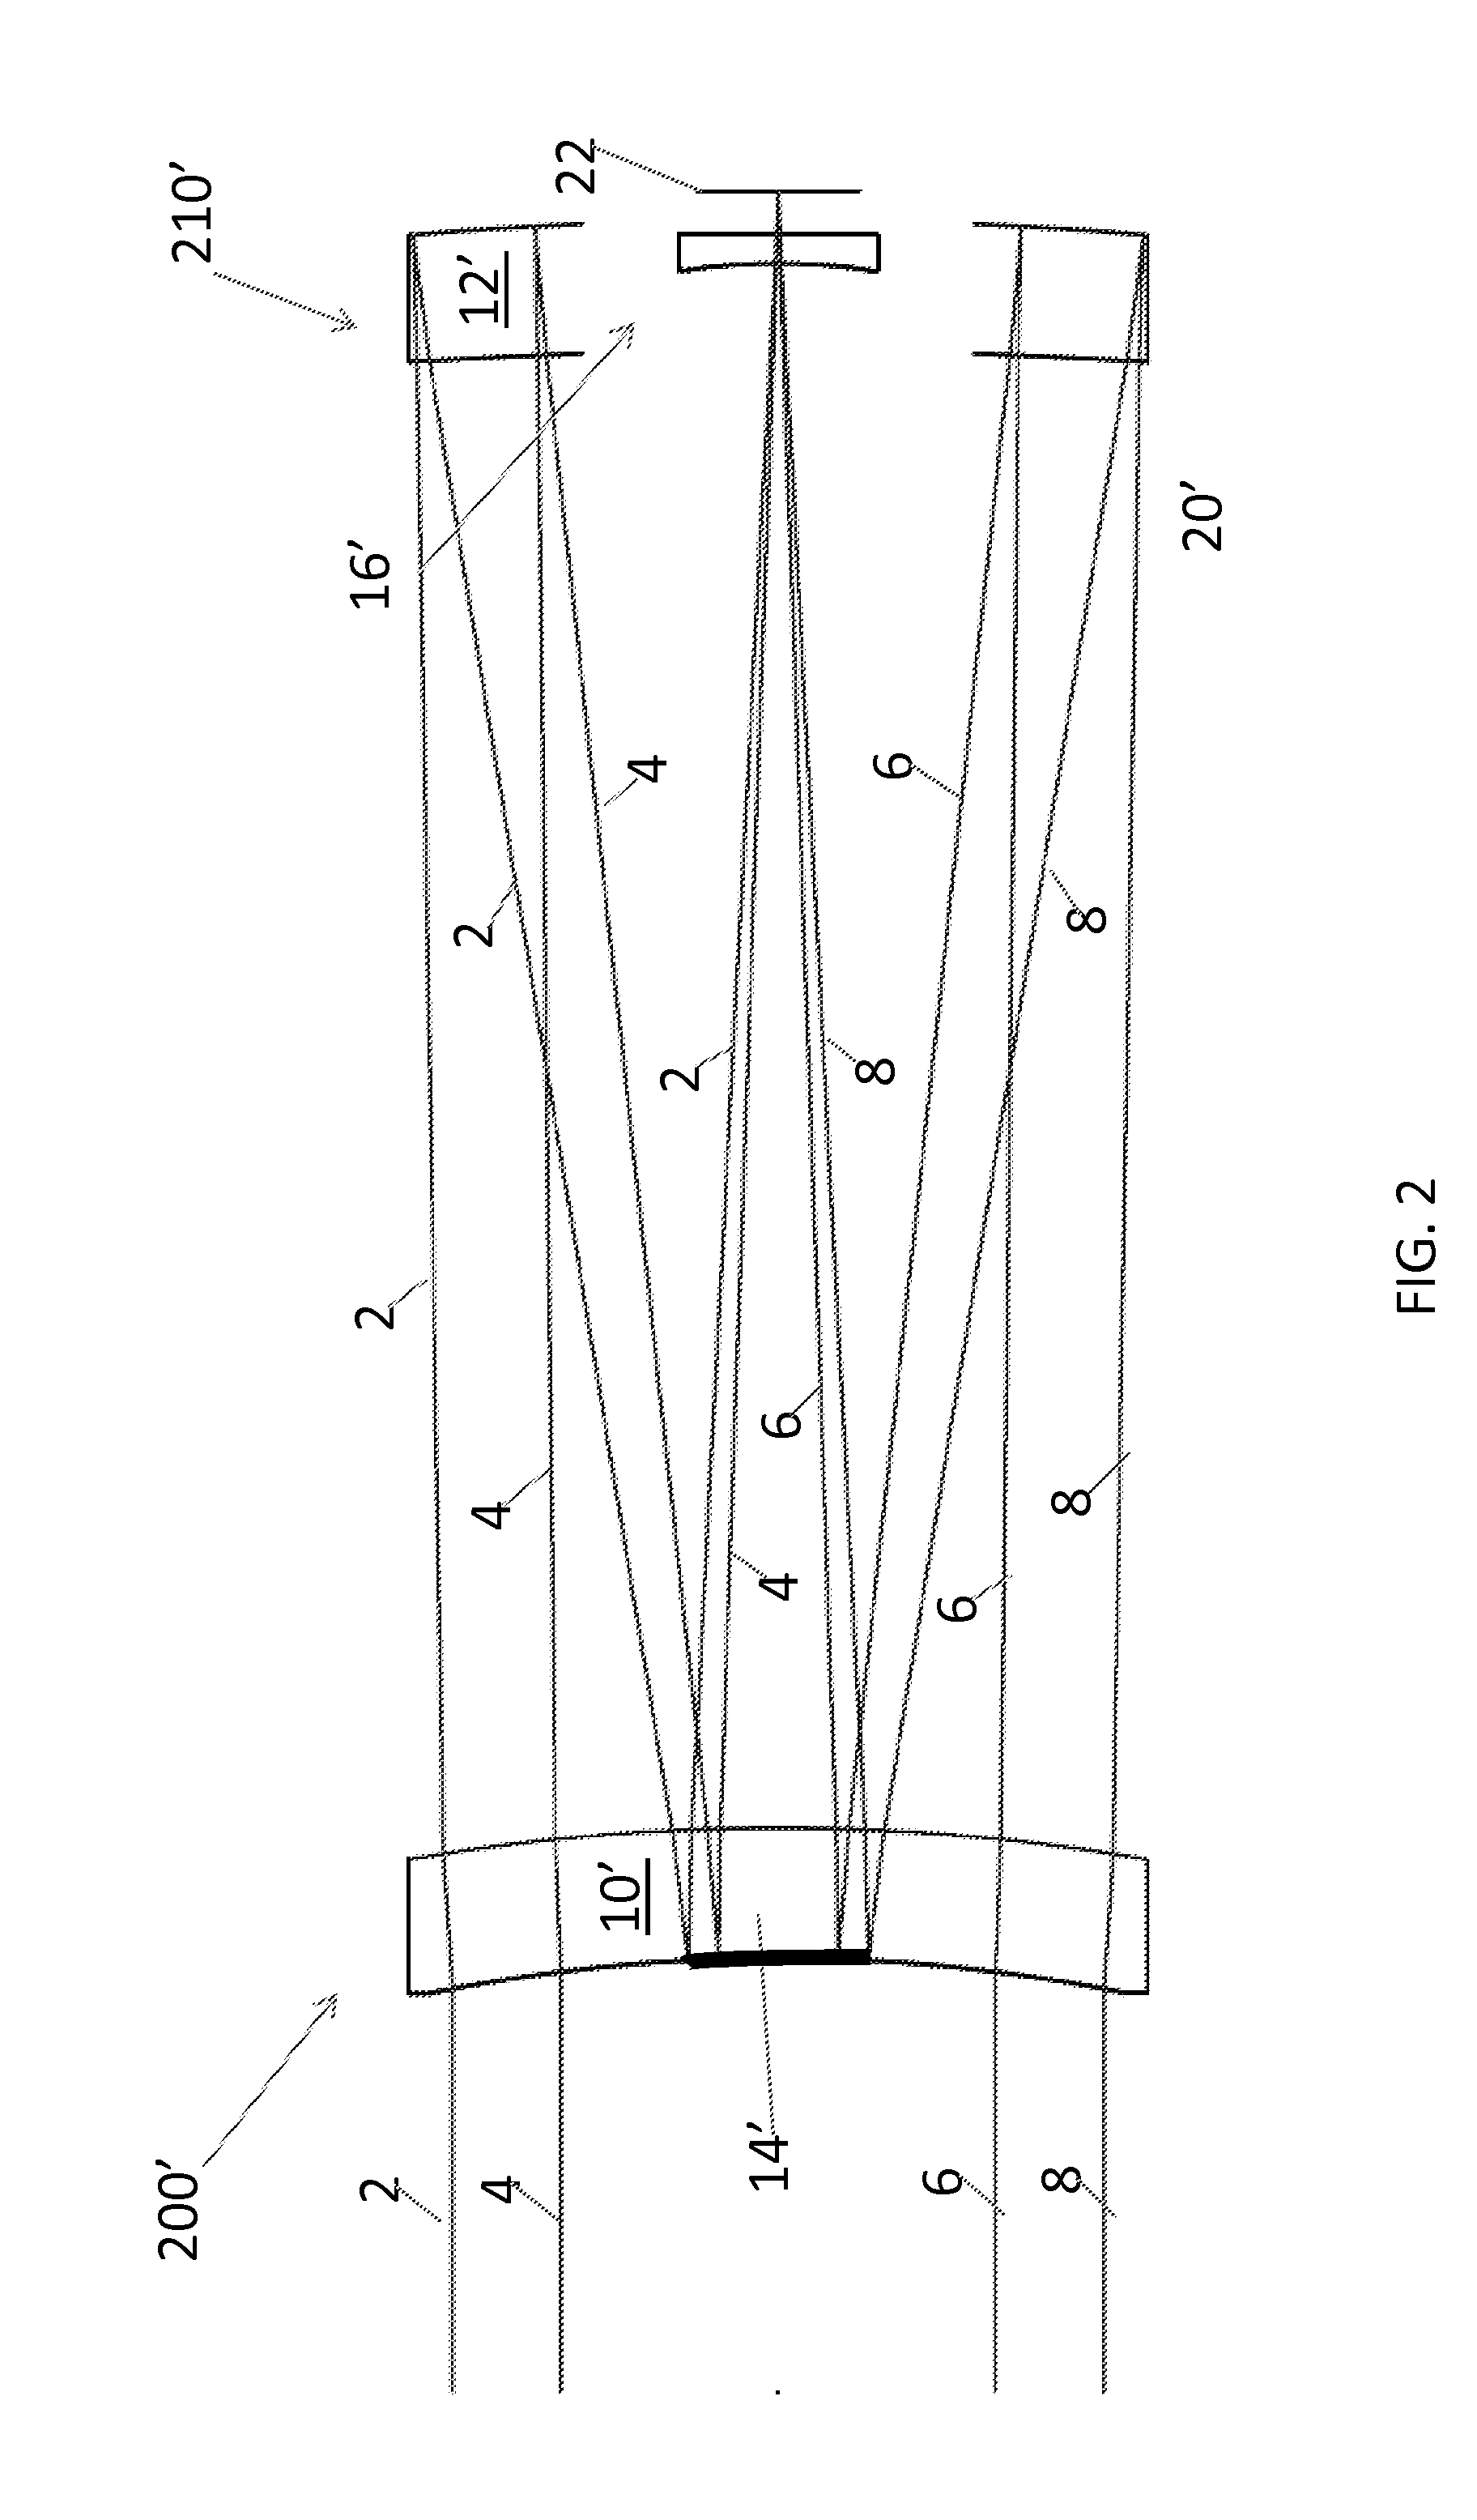 Telescope and telescope array for use in spacecraft